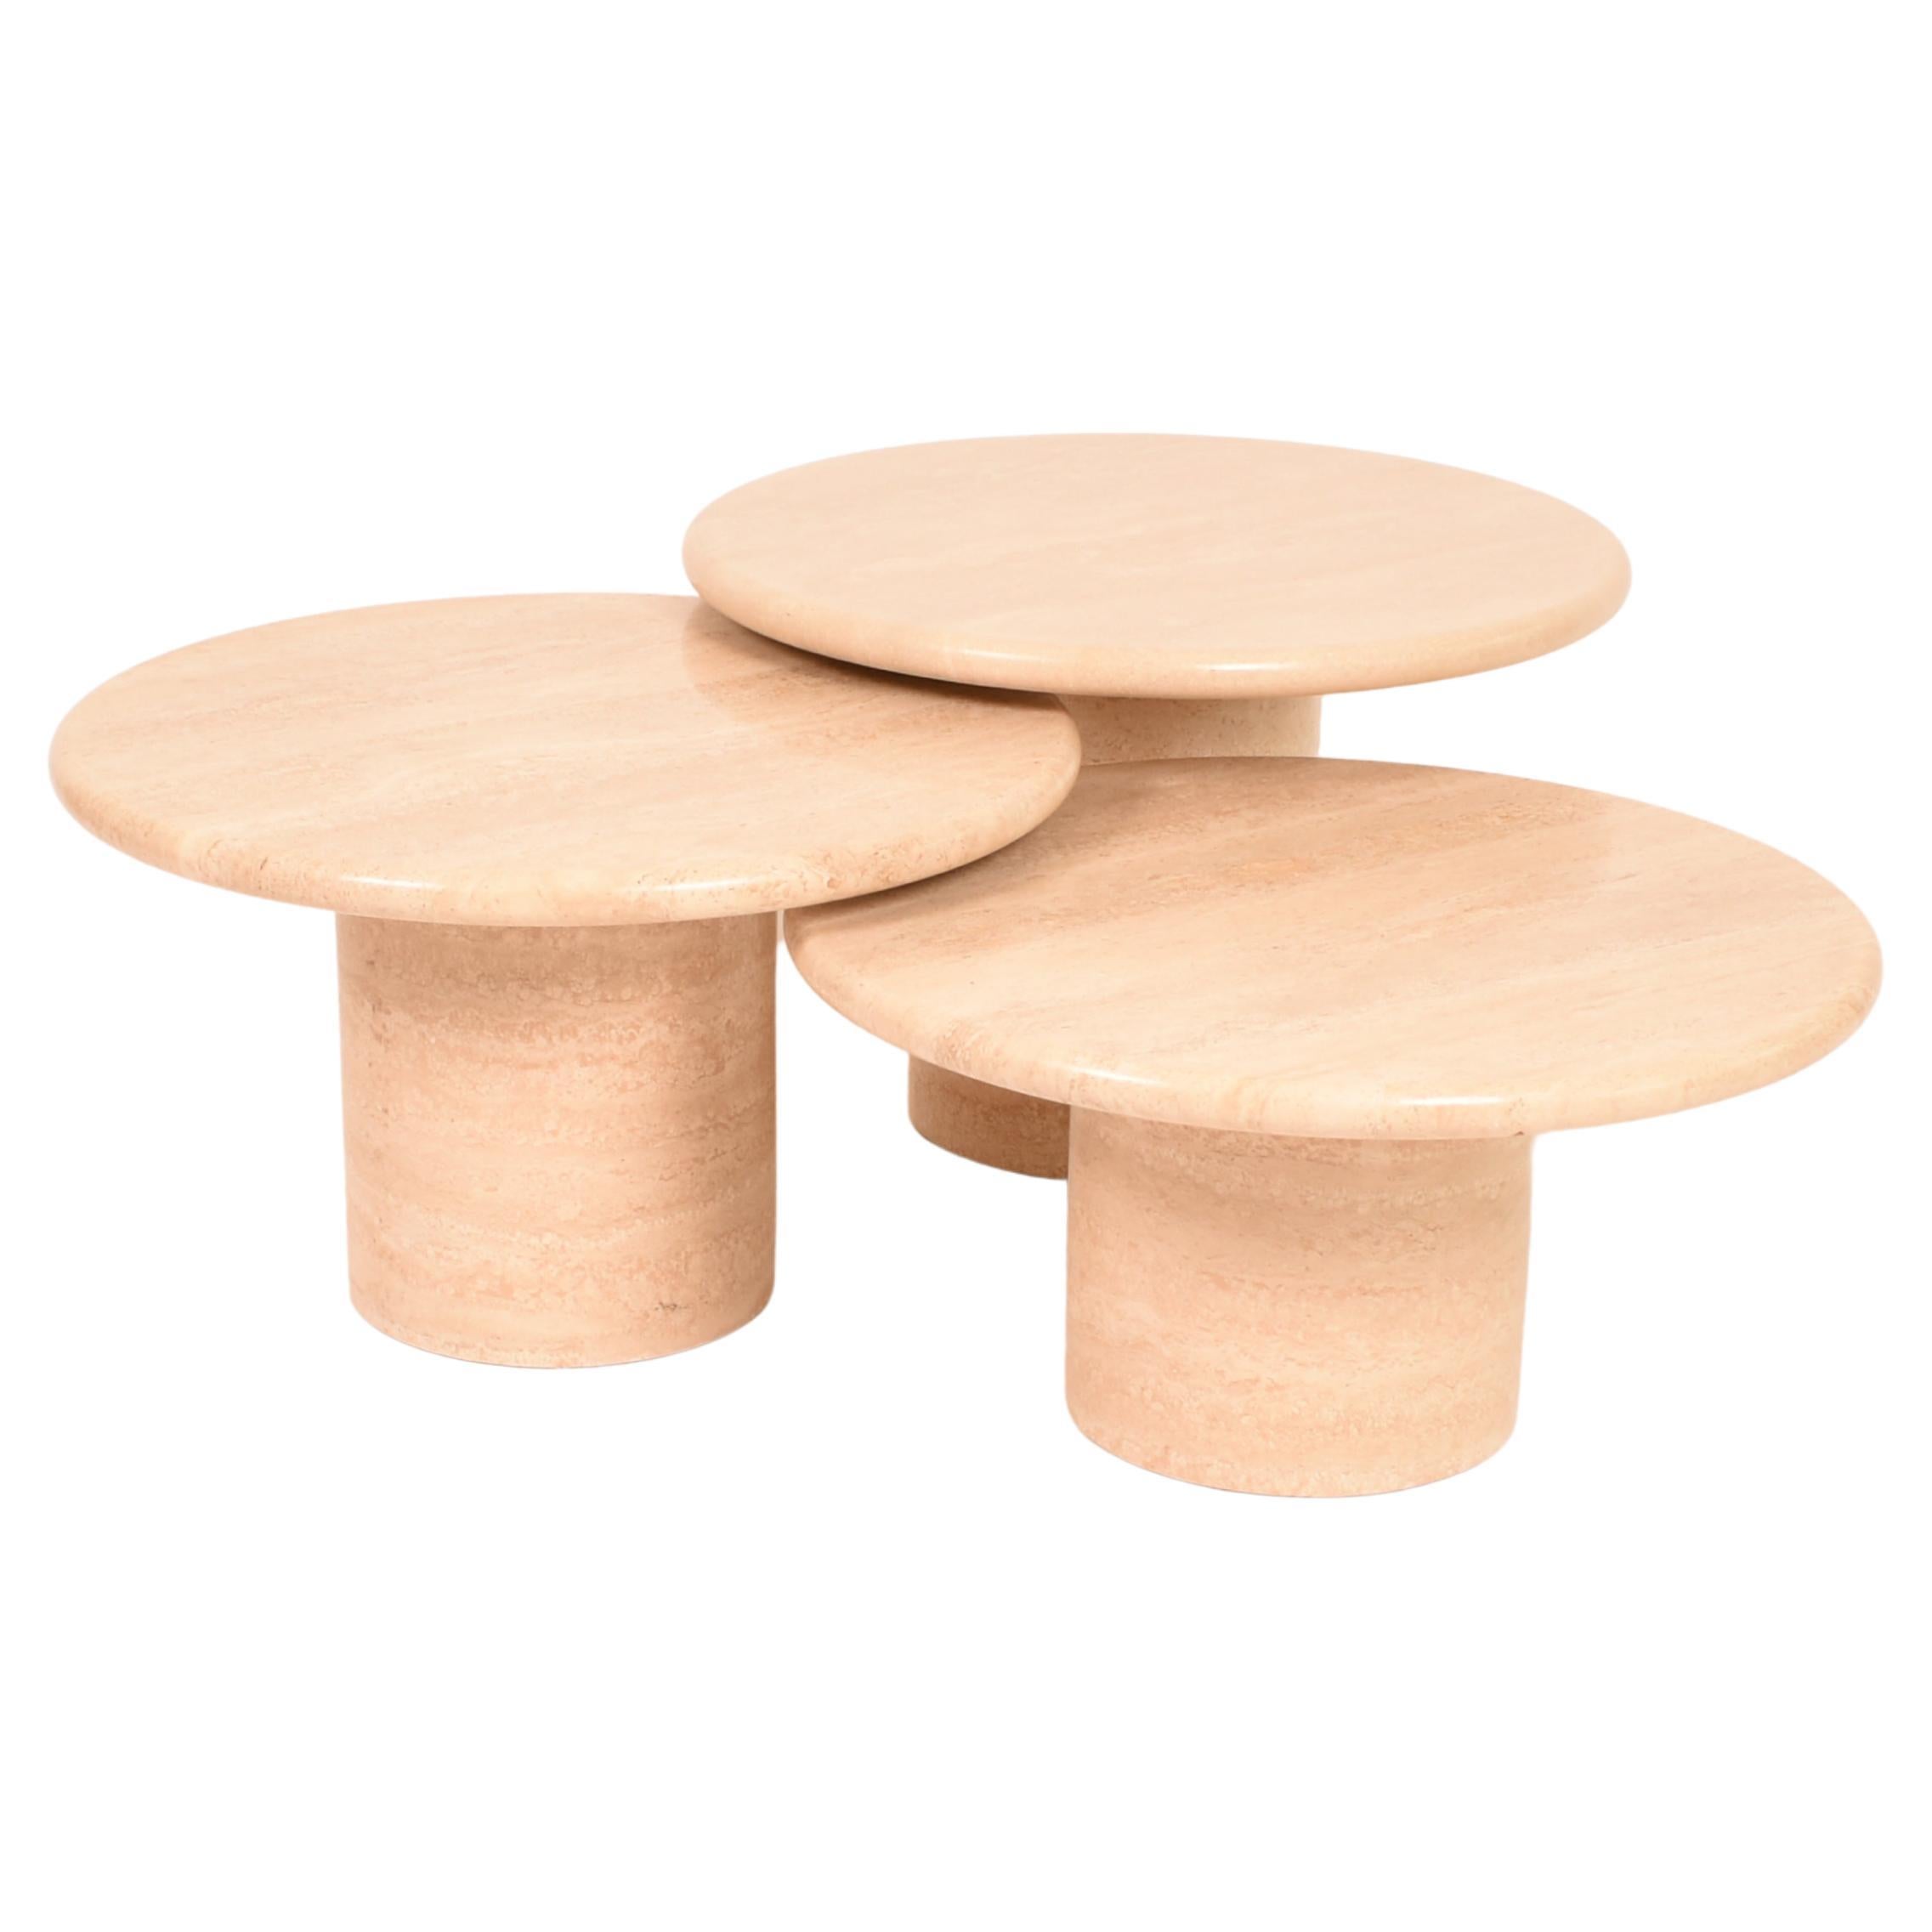 Travertine Round Pedestal Tiered Coffe Tables Set, Italy, 1970